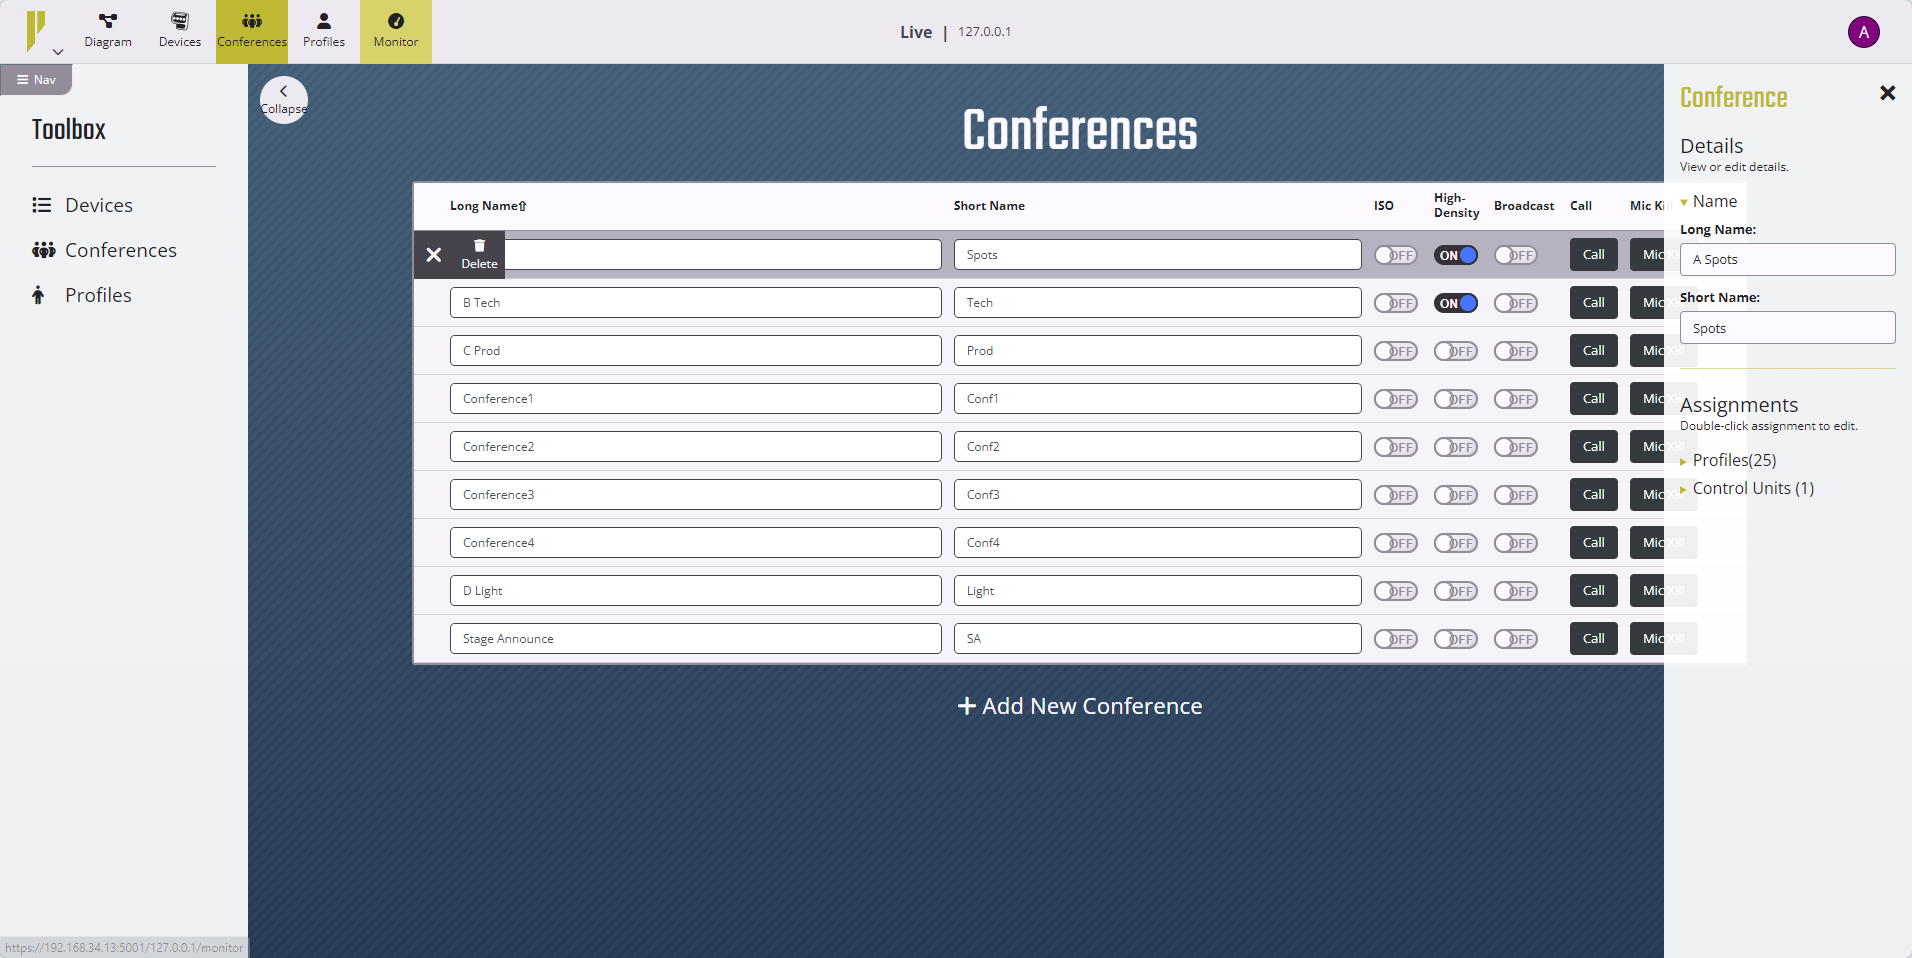 Conference Management Tab